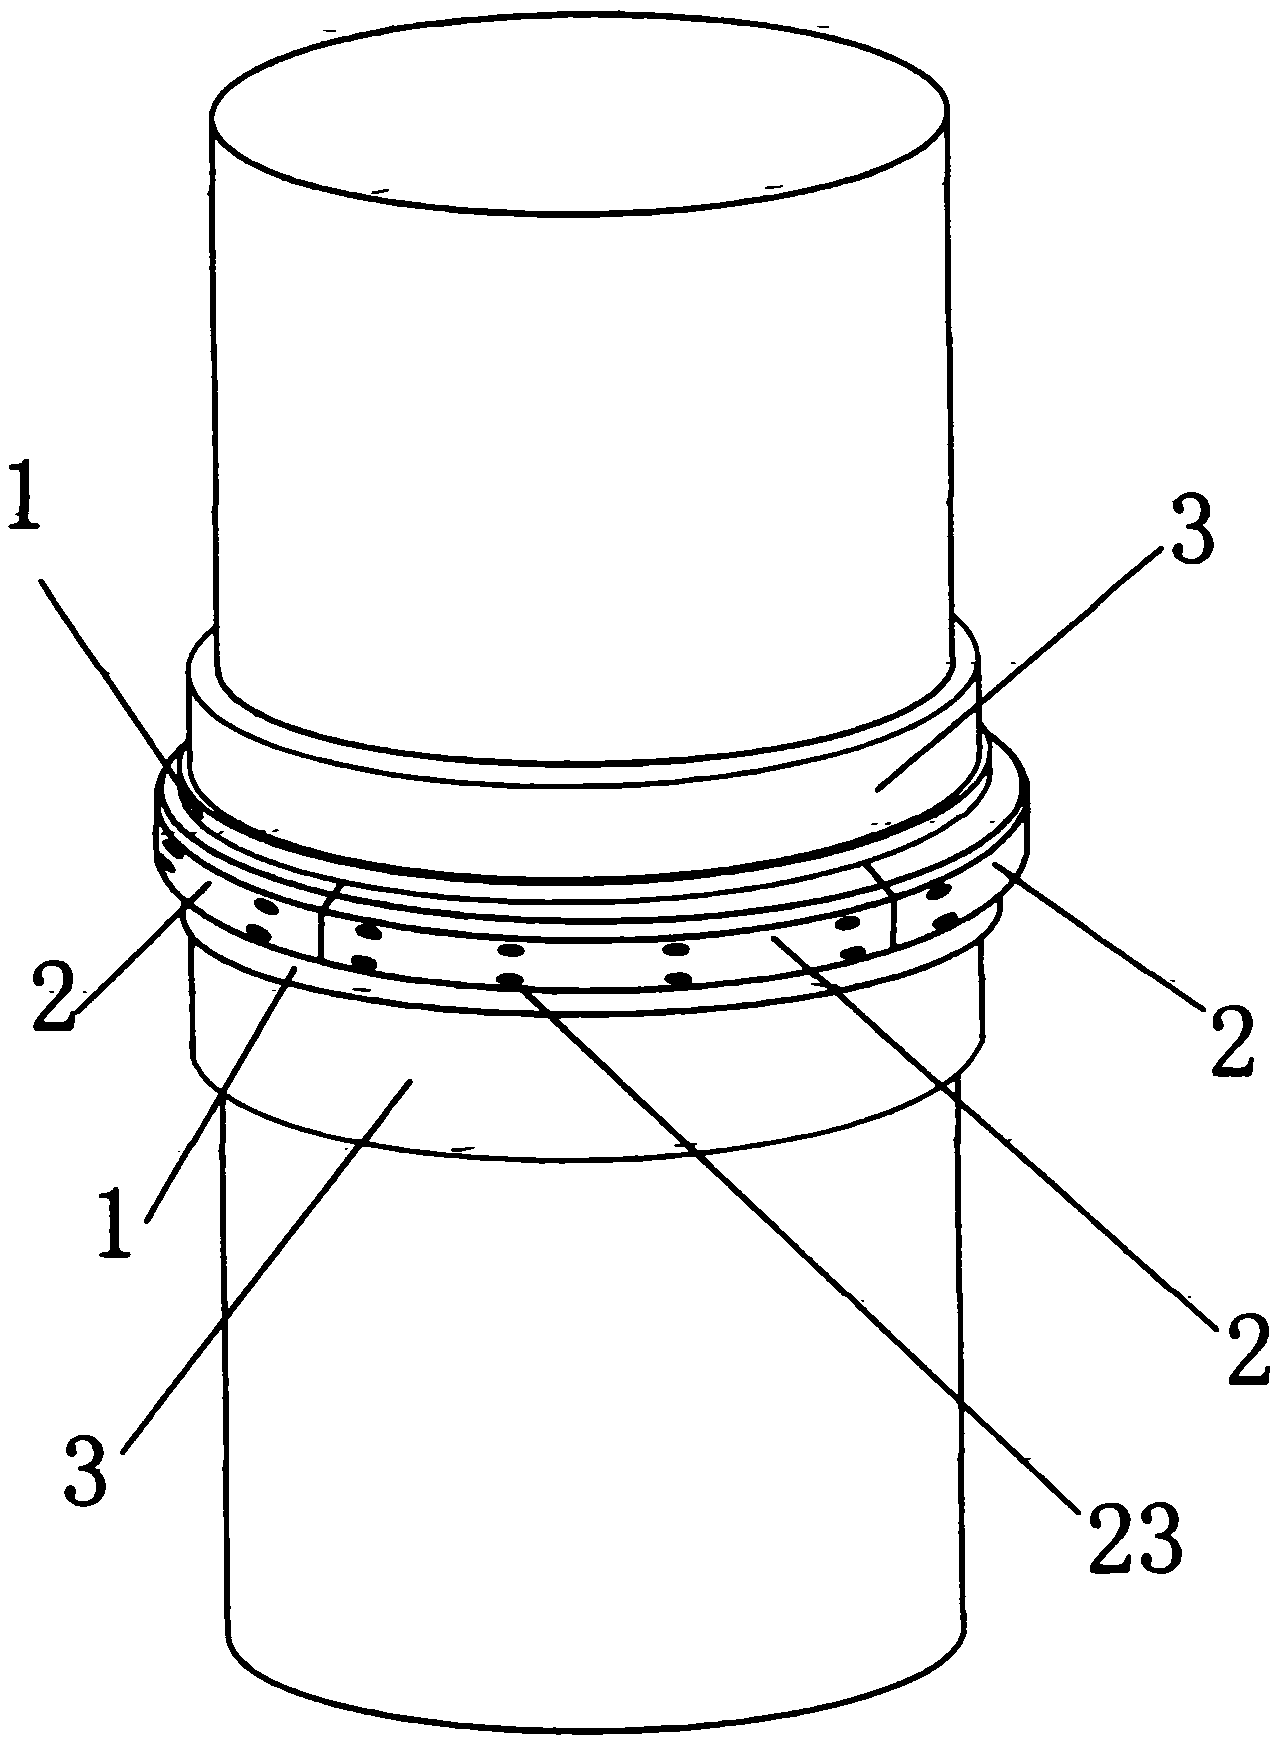 Mechanical connection structure used for uplift pile foundation and connection method thereof